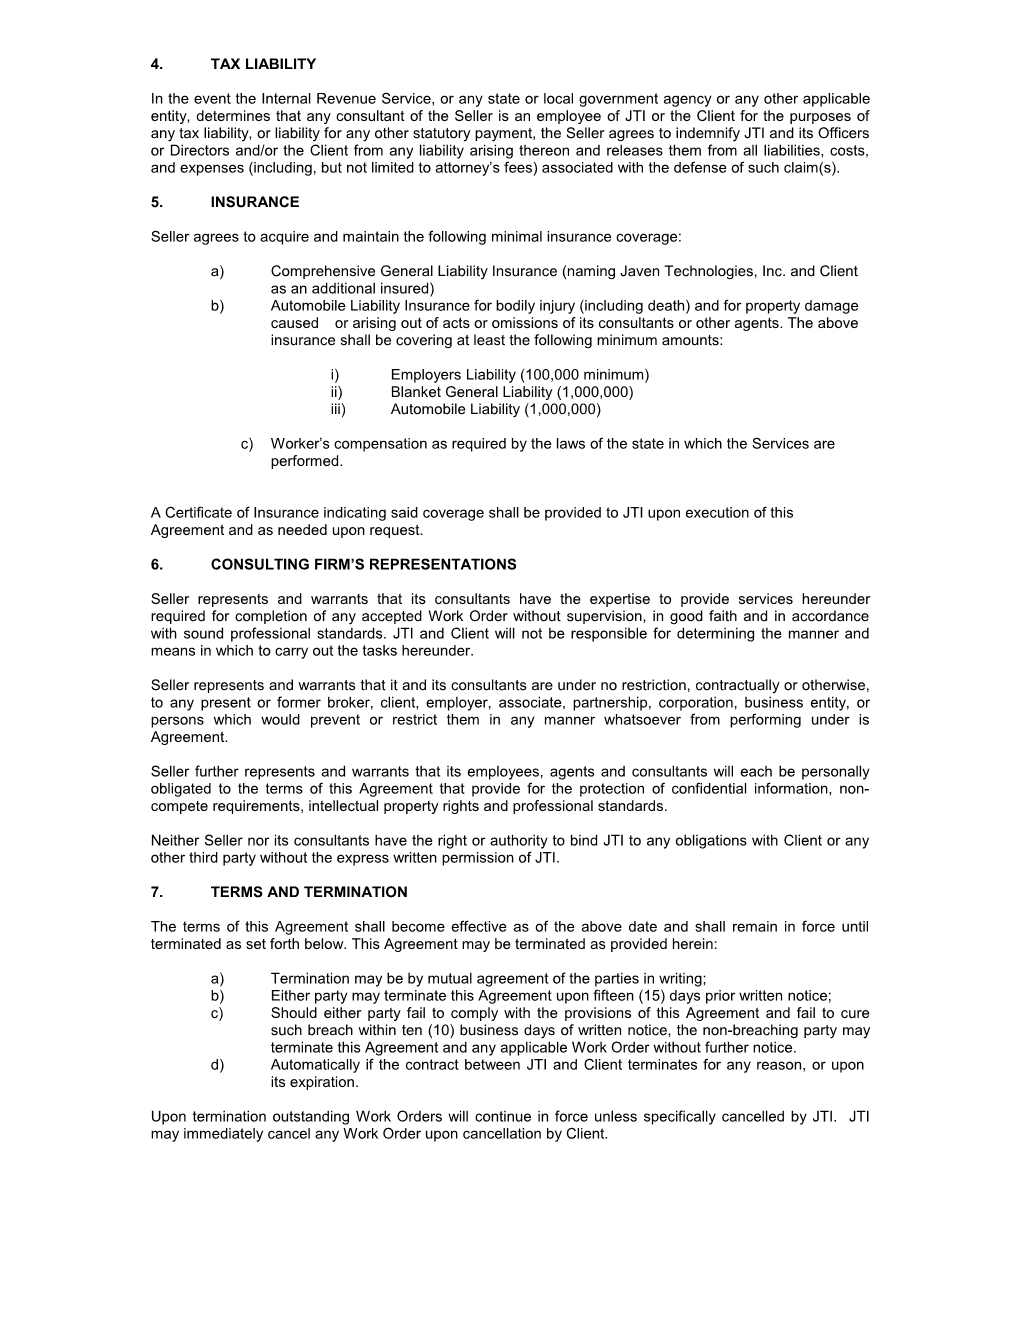 Master Contracting Agreement